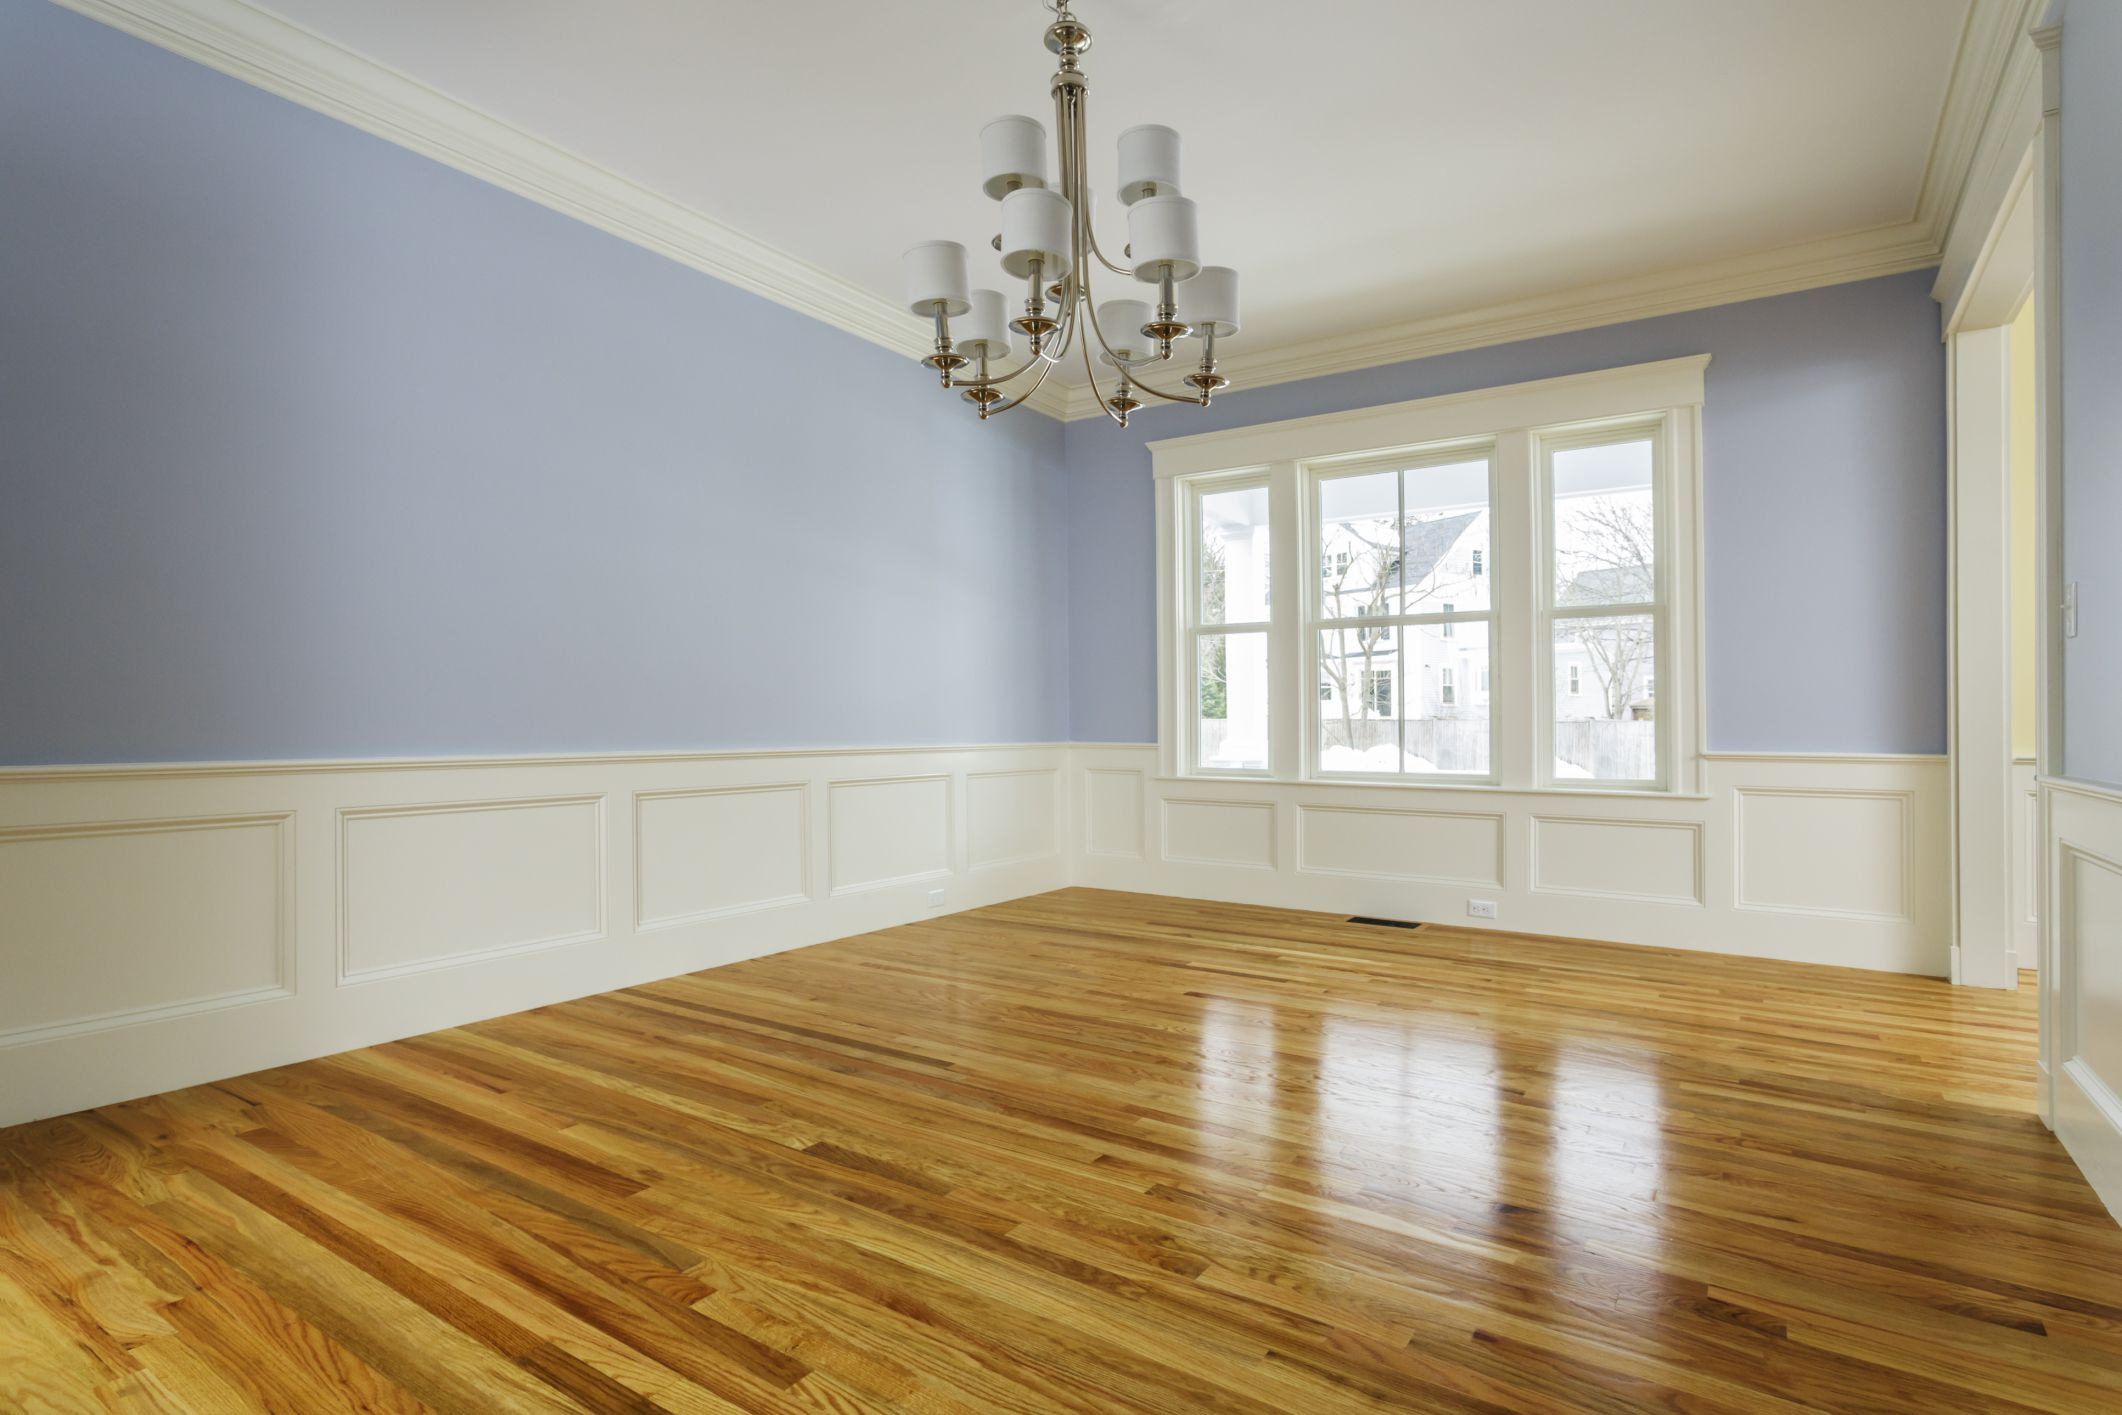 14 Awesome Best Product to Clean Hardwood Floors 2024 free download best product to clean hardwood floors of how to make hardwood floors shiny with regard to 168686572 56a4e87c3df78cf7728544a2